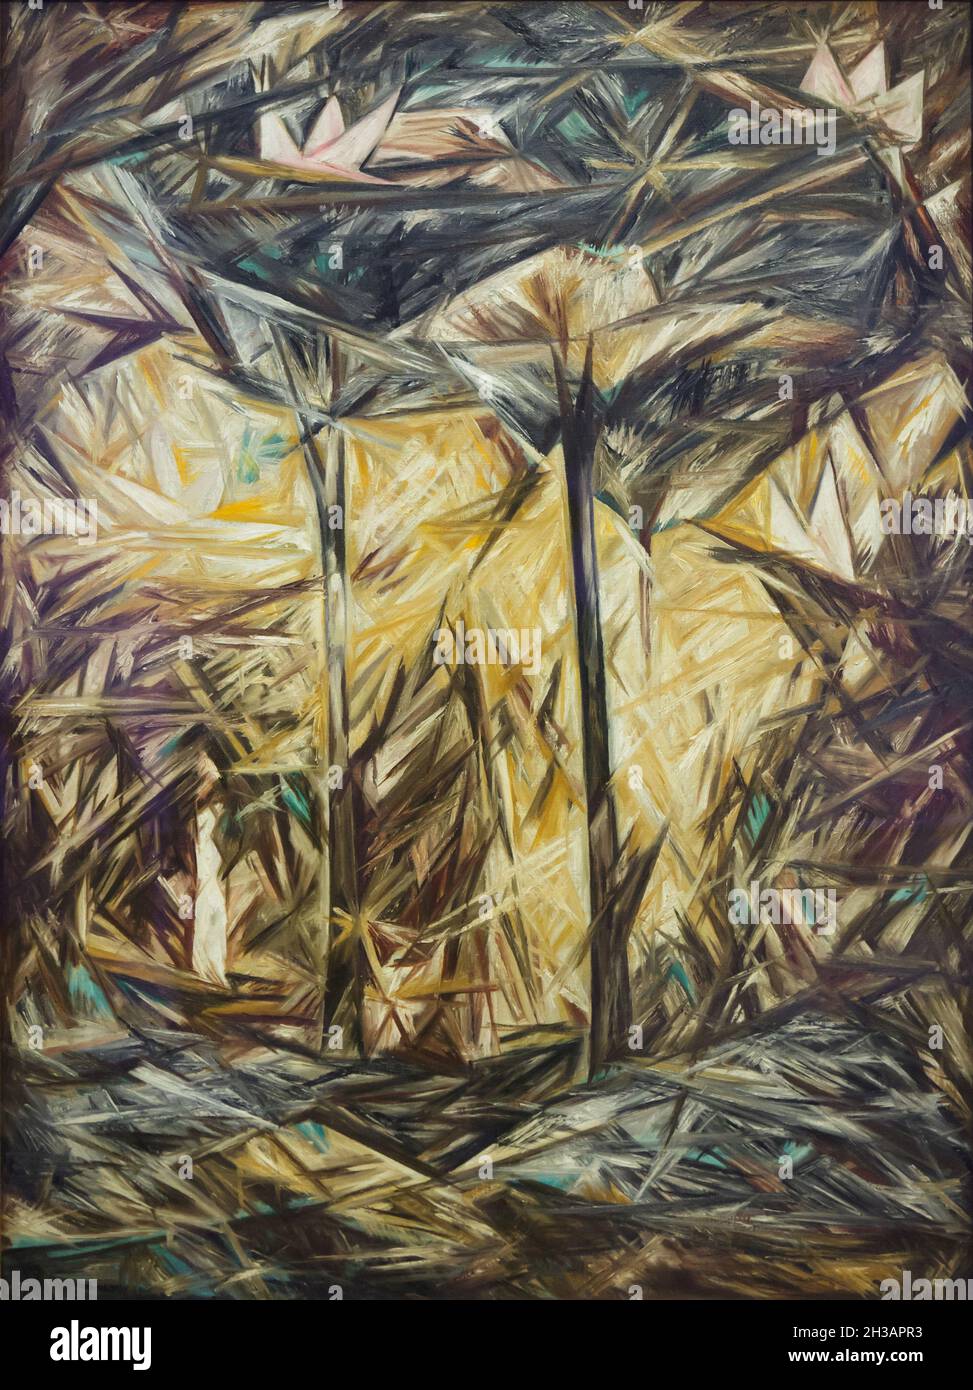 Painting 'Forest' by Russian avant-garde painter Natalia Goncharova (1913) on display at the special exhibition devoted to Impressionism in Russia in the Museum Barberini in Potsdam, Germany. The exhibition entitled 'Dawn of the Avant-Garde' runs till 9 January 2022. Stock Photo